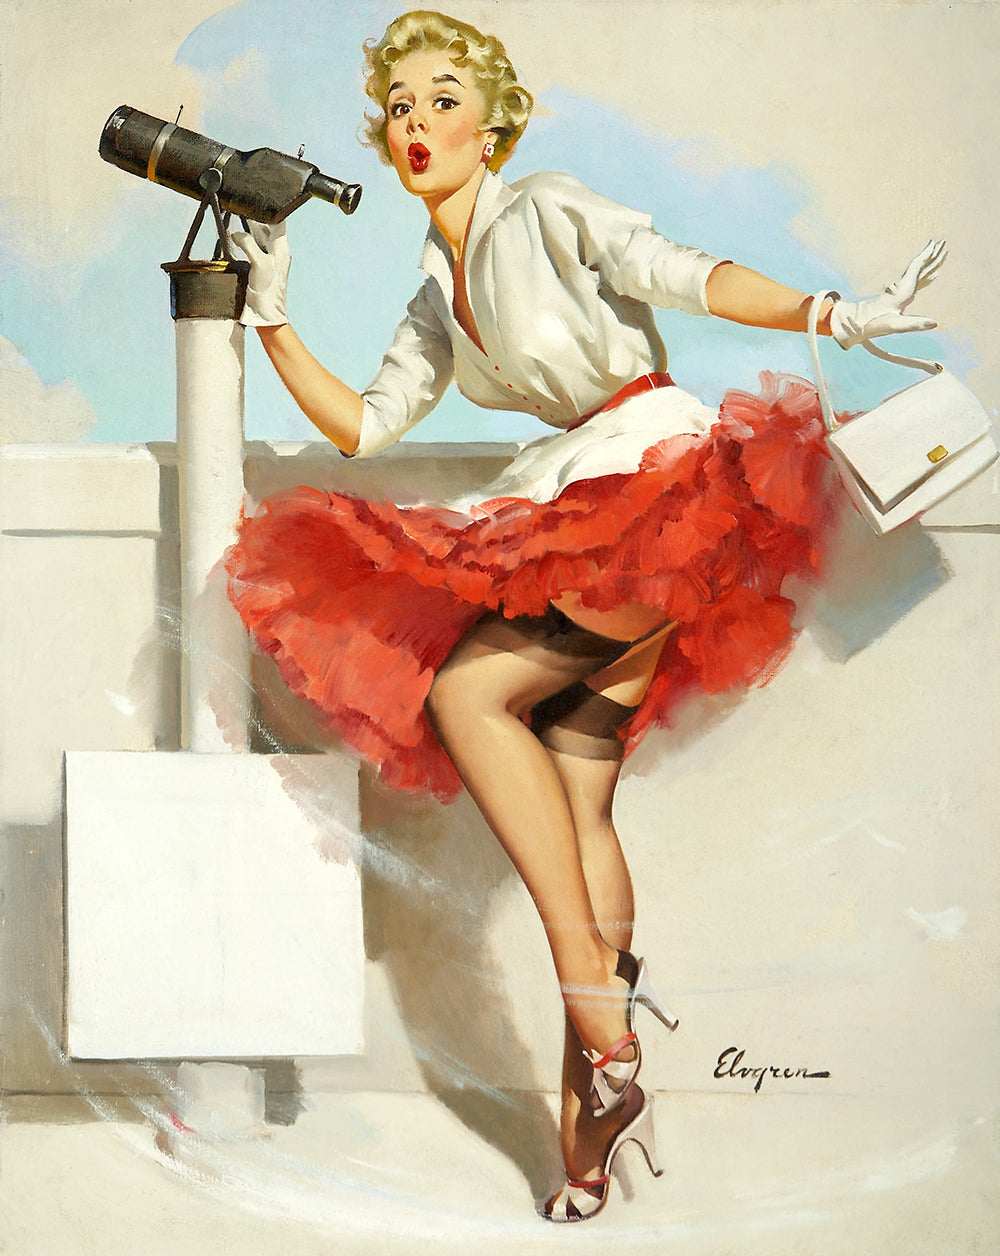 What A View by Gil Elvgren